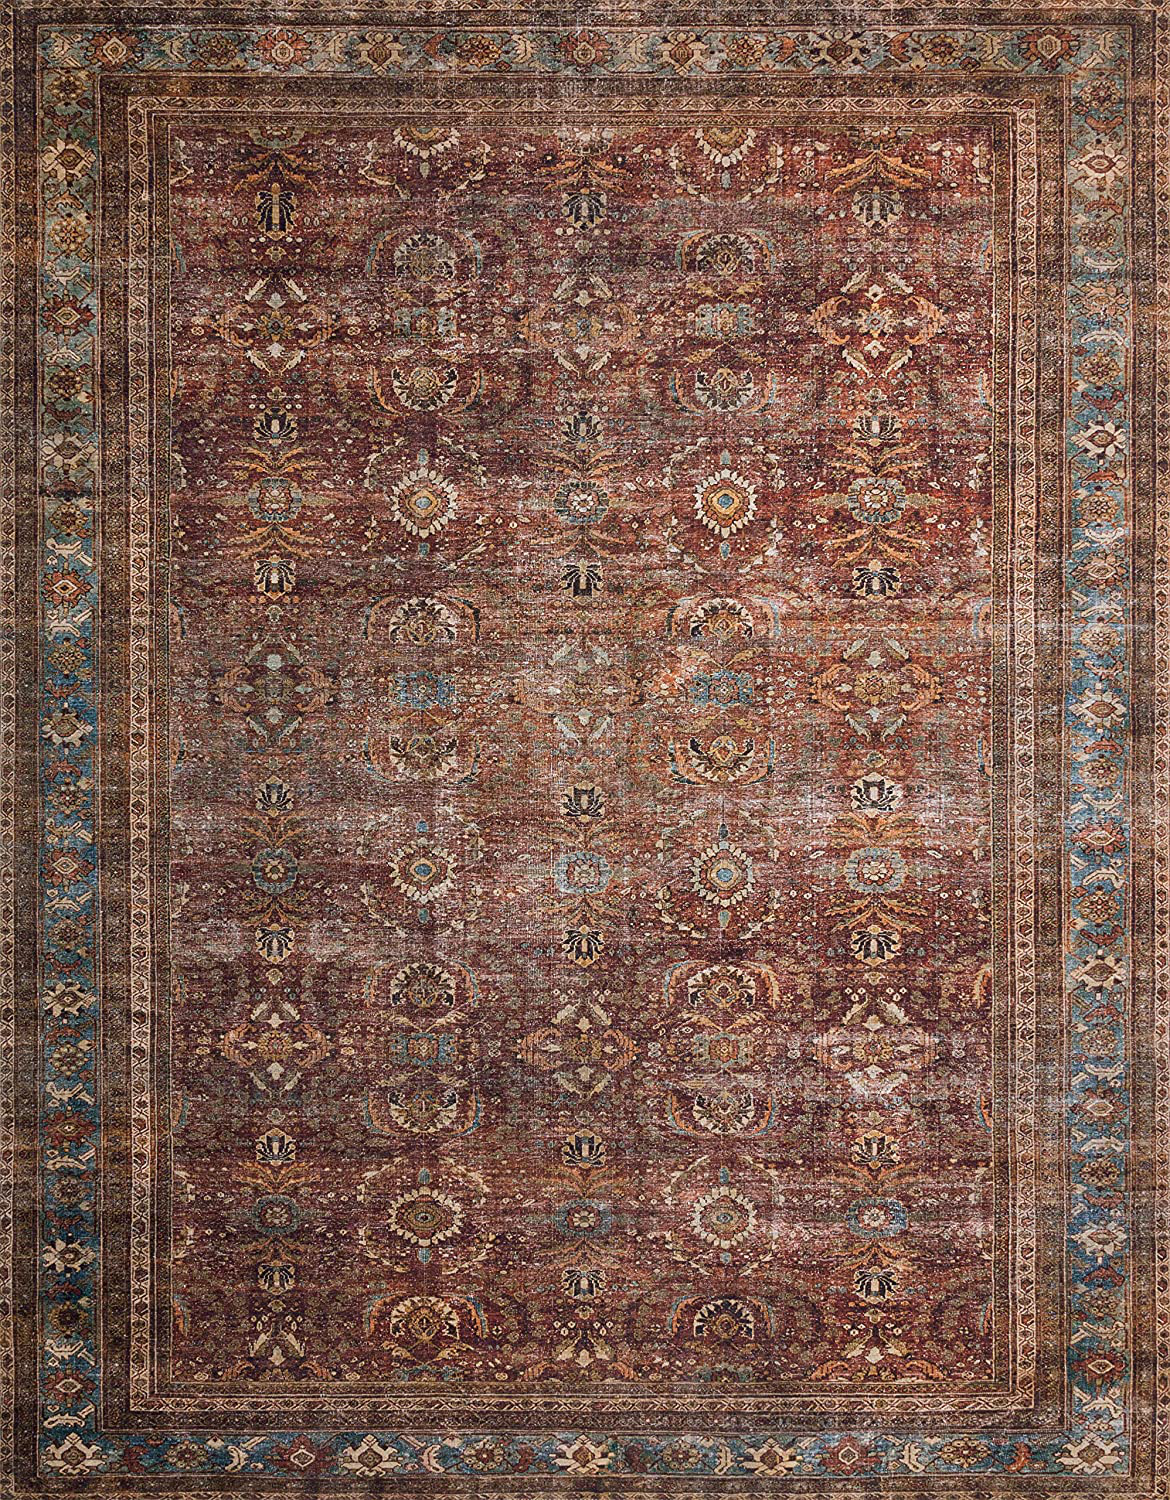 Loloi II Layla Collection Area Rugs, 1'-6" x 1'-6" Sample Swatch, COBALT BLUE/SPICE